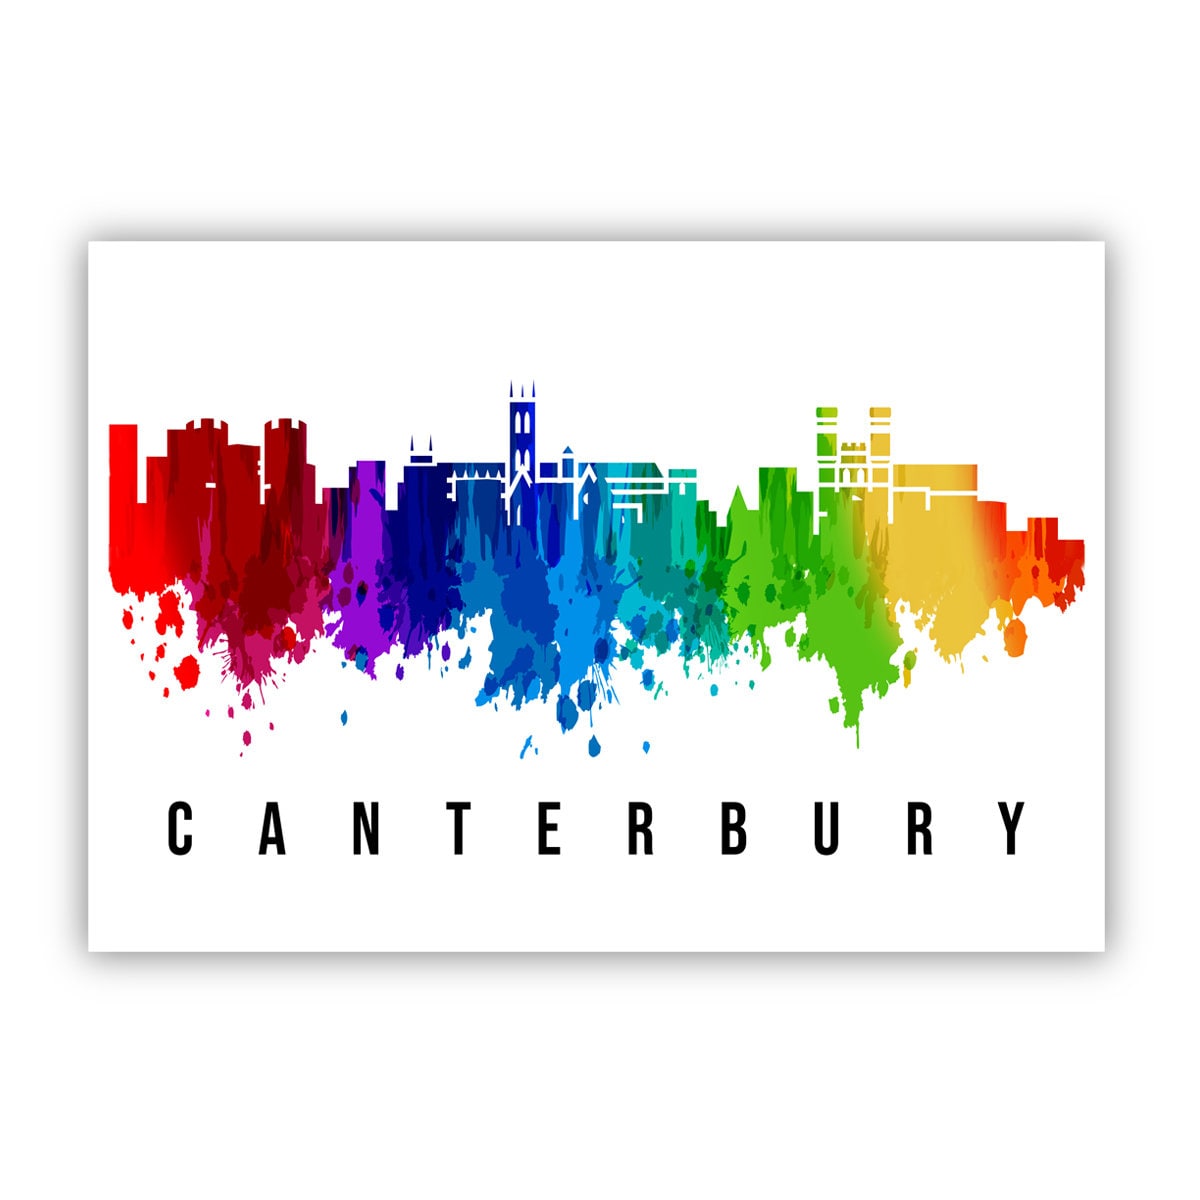 Canterbury England Poster, Skyline poster cityscape poster, Landmark City Illustration poster, Home wall decoration, Office wall art